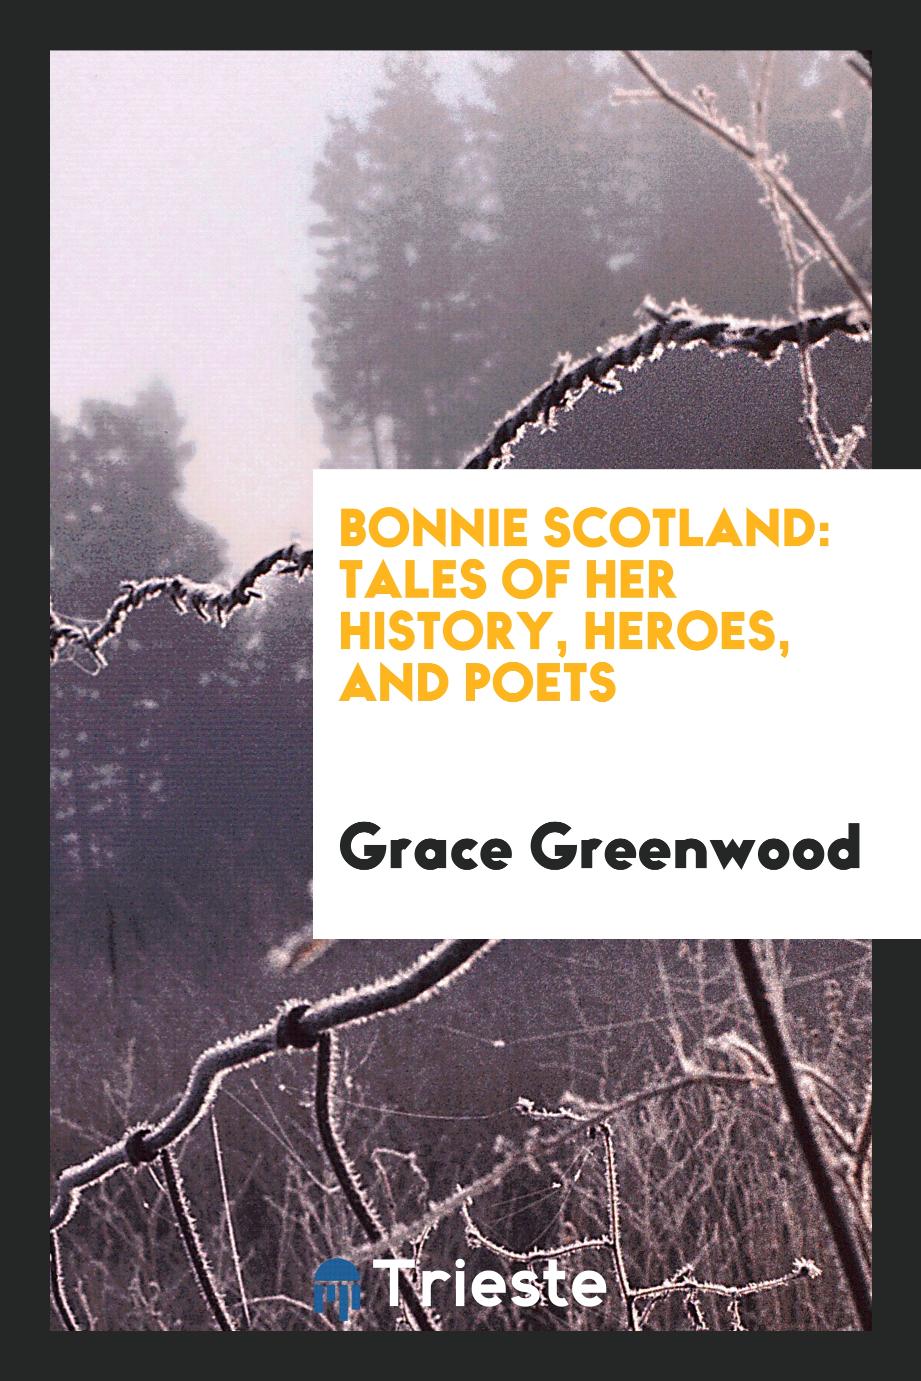 Bonnie Scotland: Tales of Her History, Heroes, and Poets